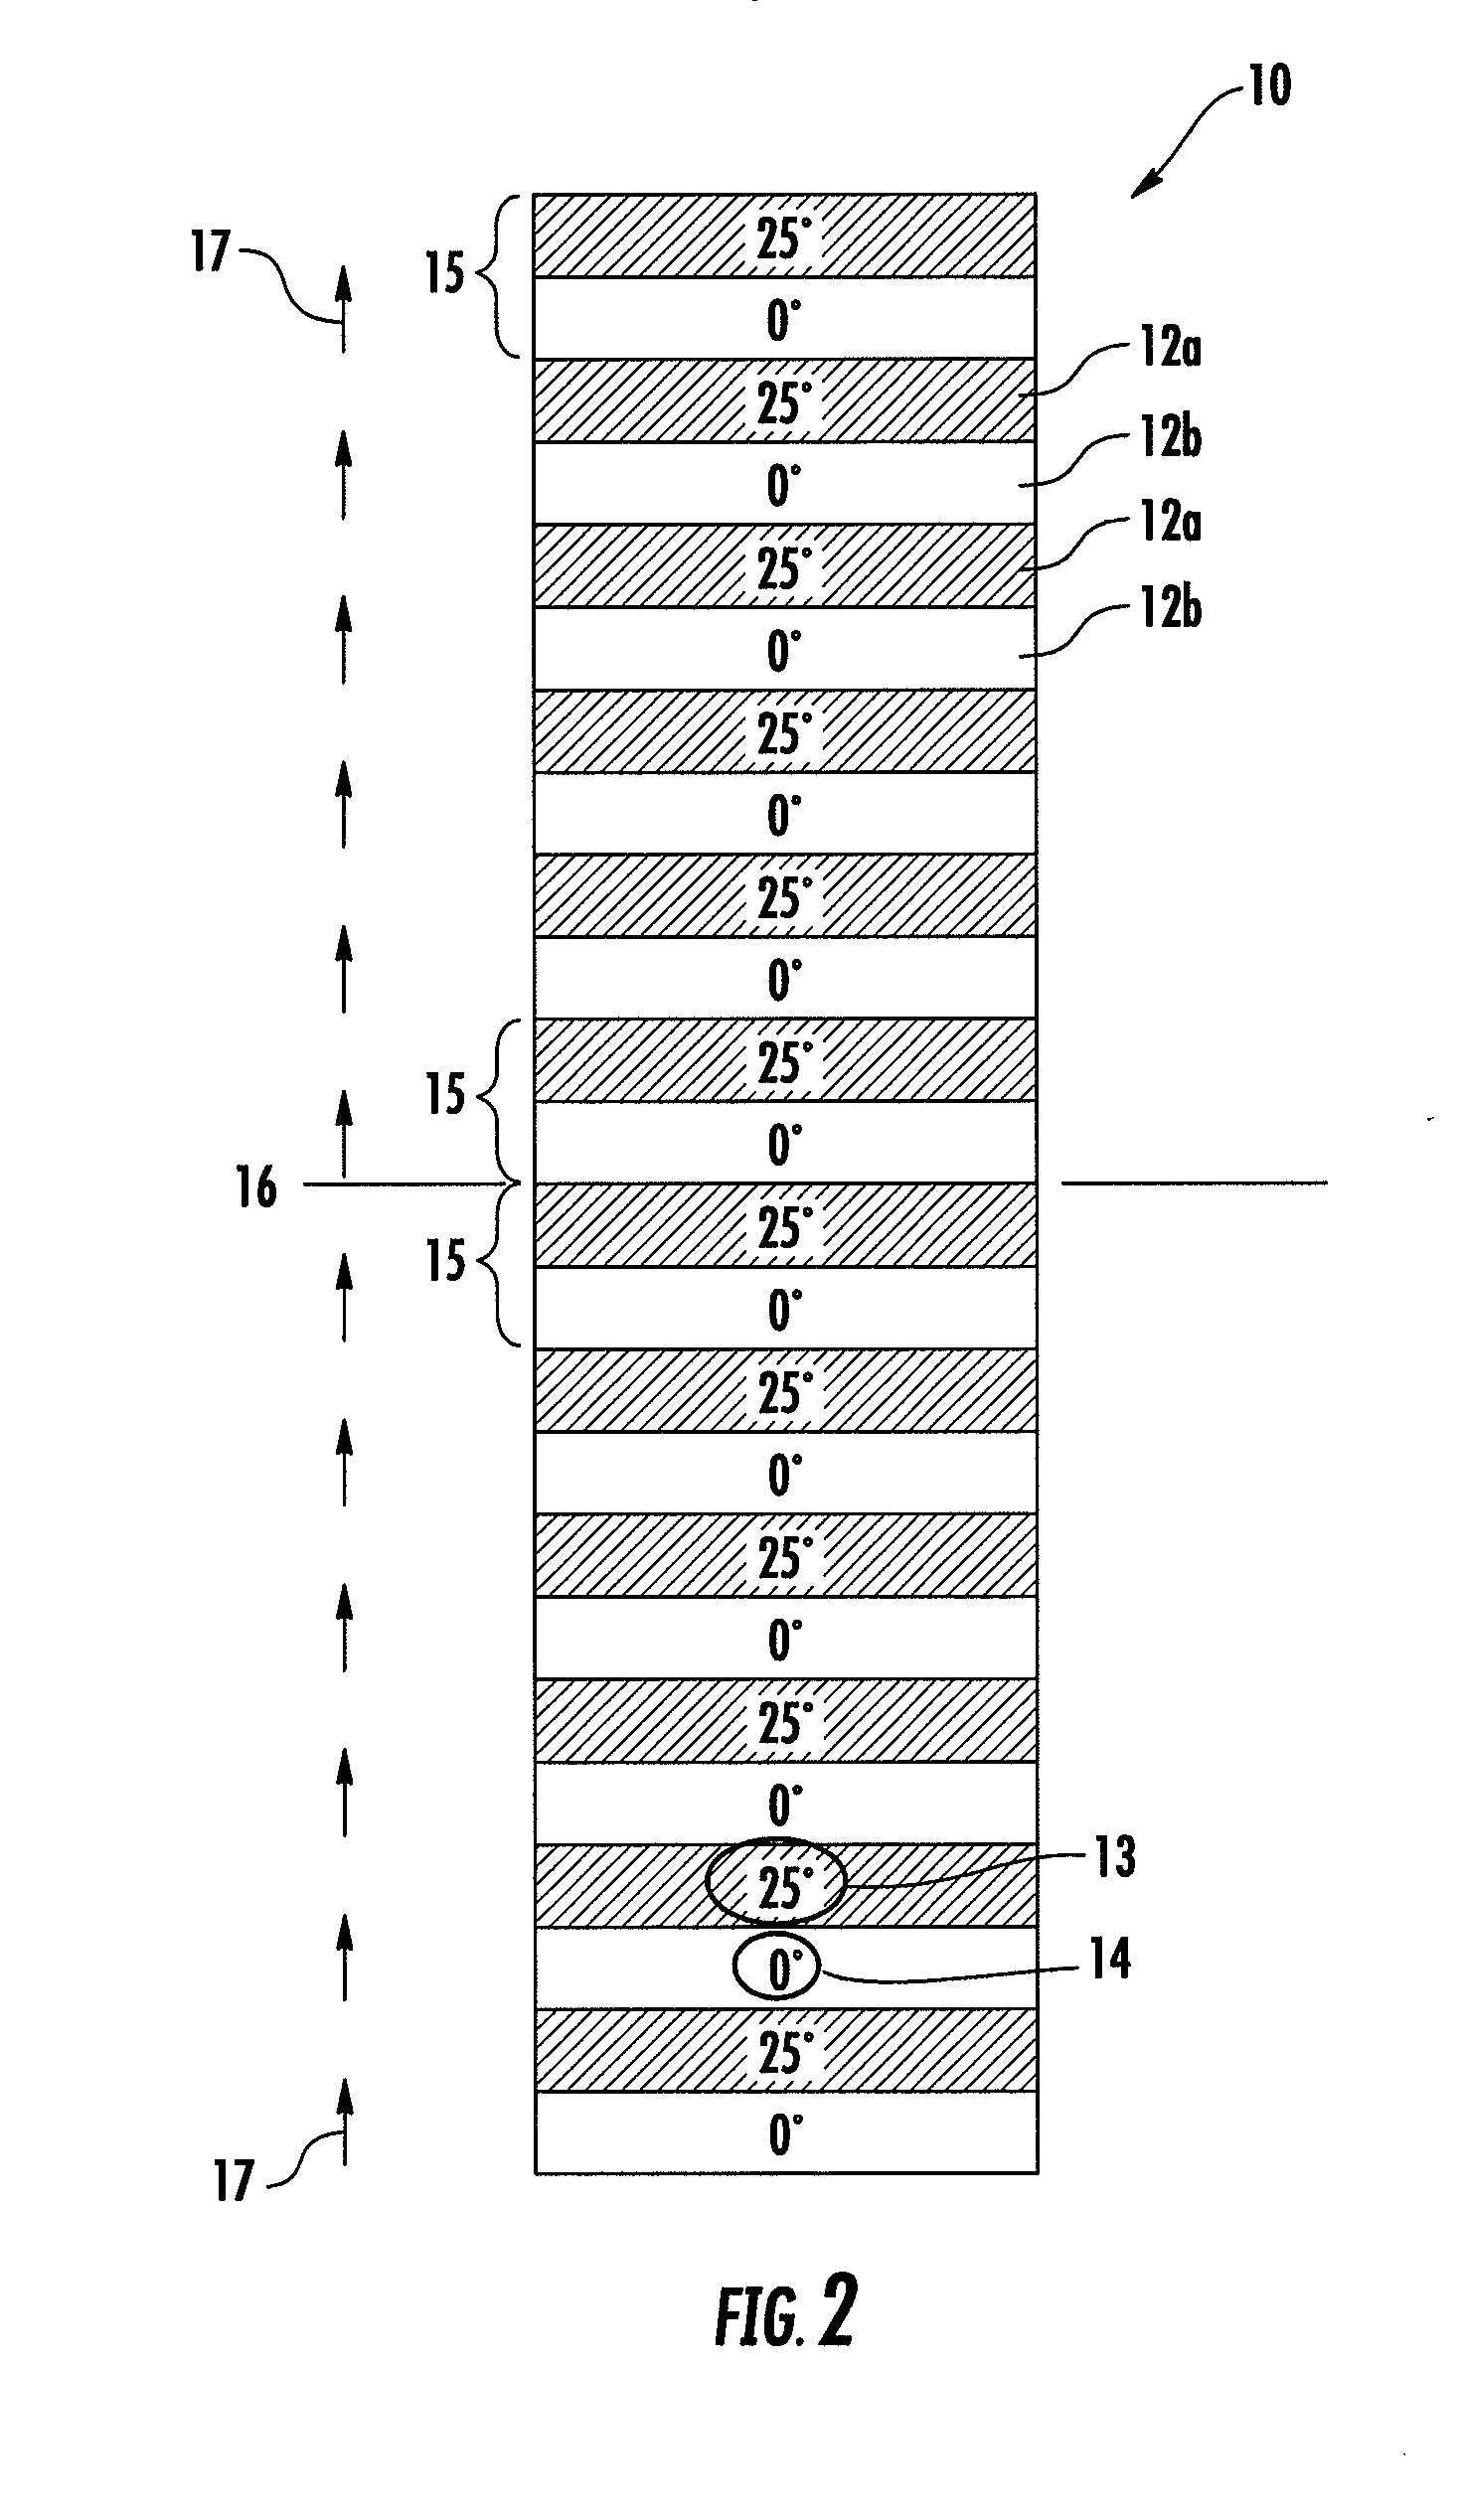 Composite laminated structures and methods for manufacturing and using the same